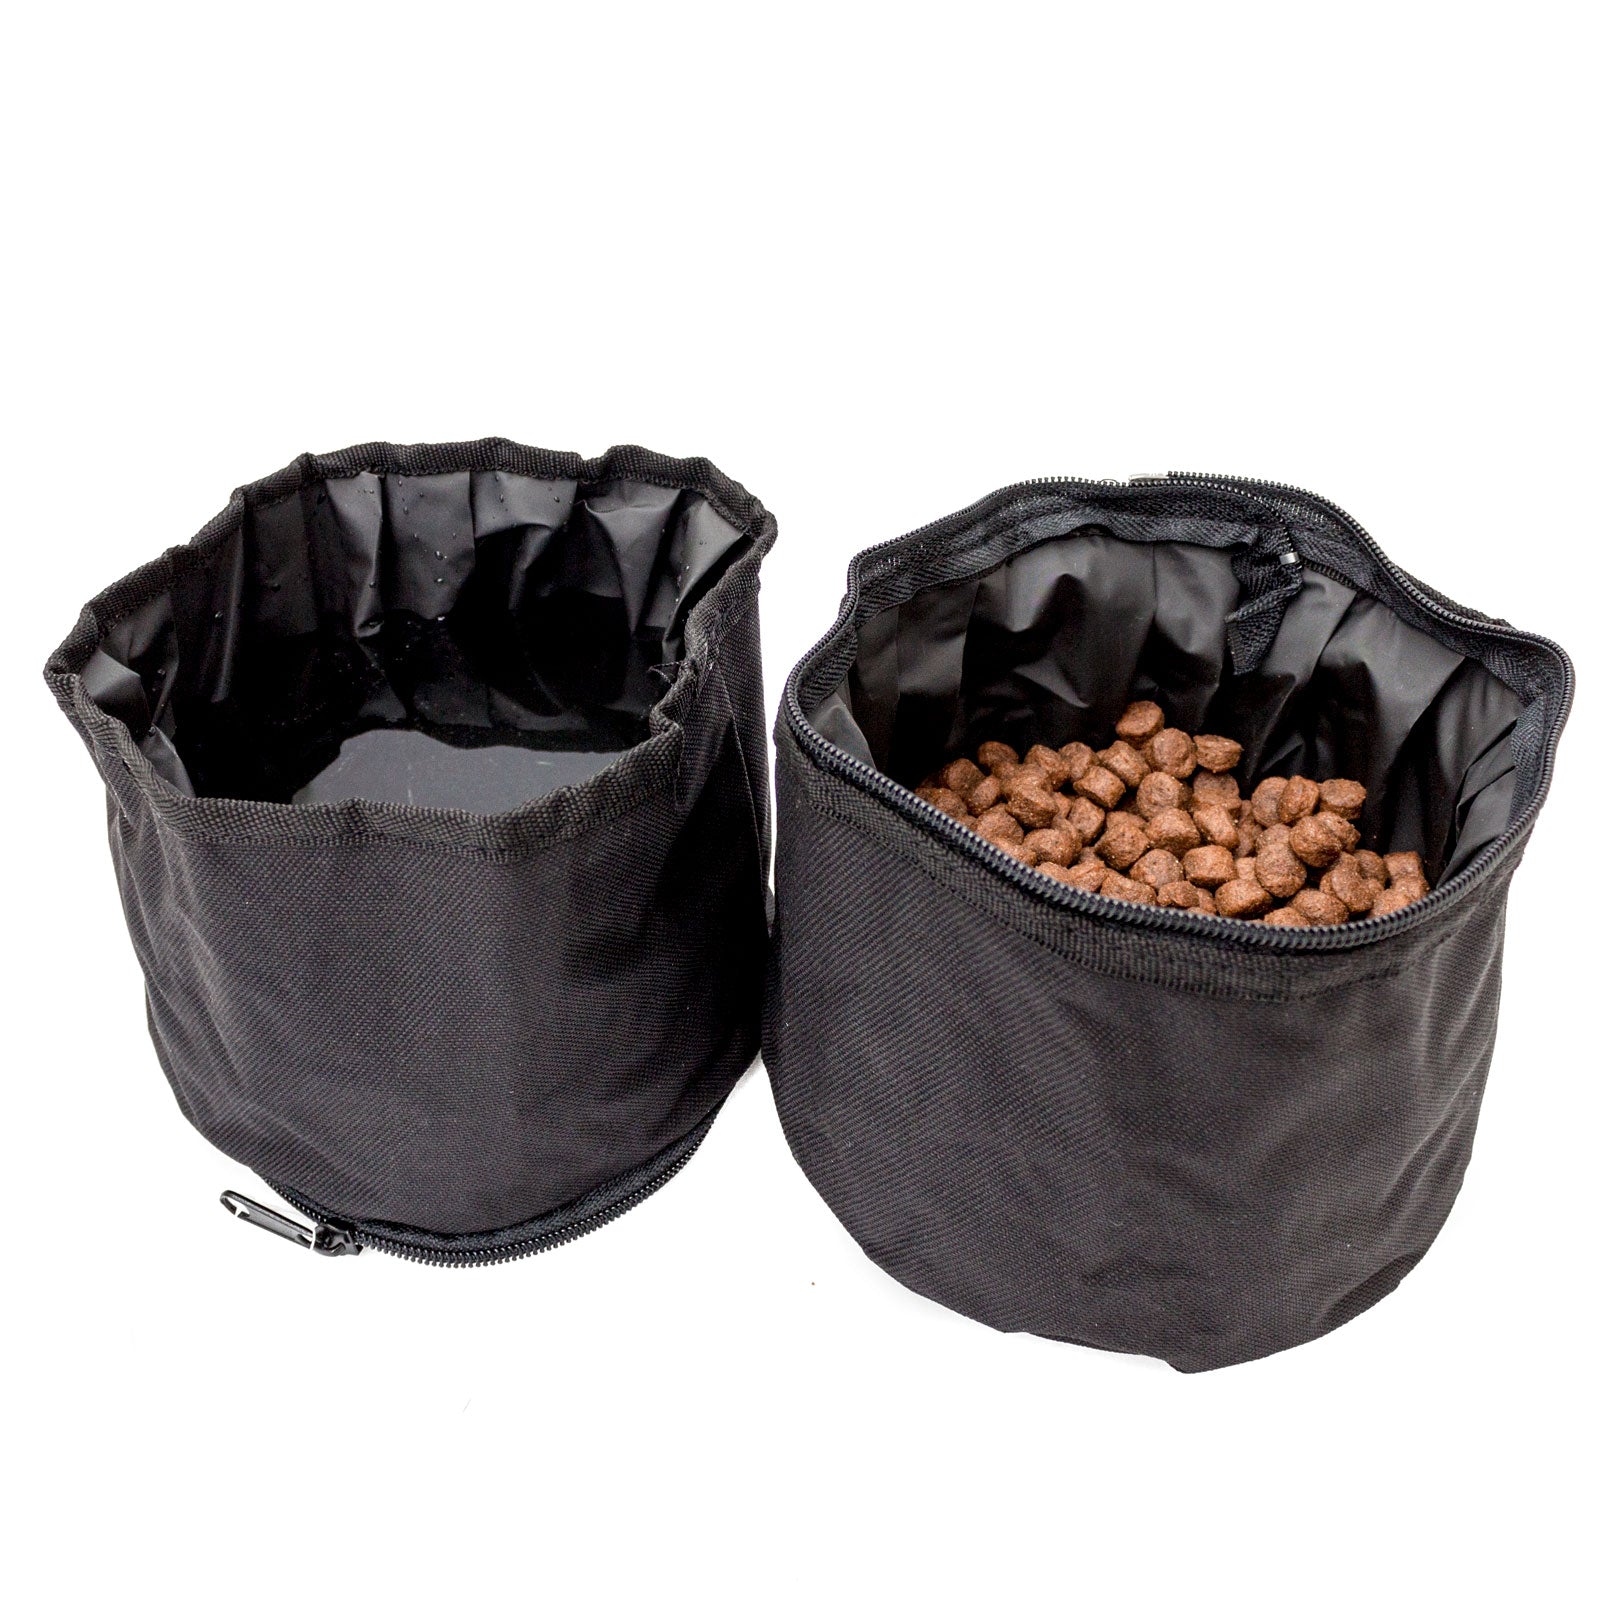 POODLE - Double Portable Travel Dog Bowl - Food And Water